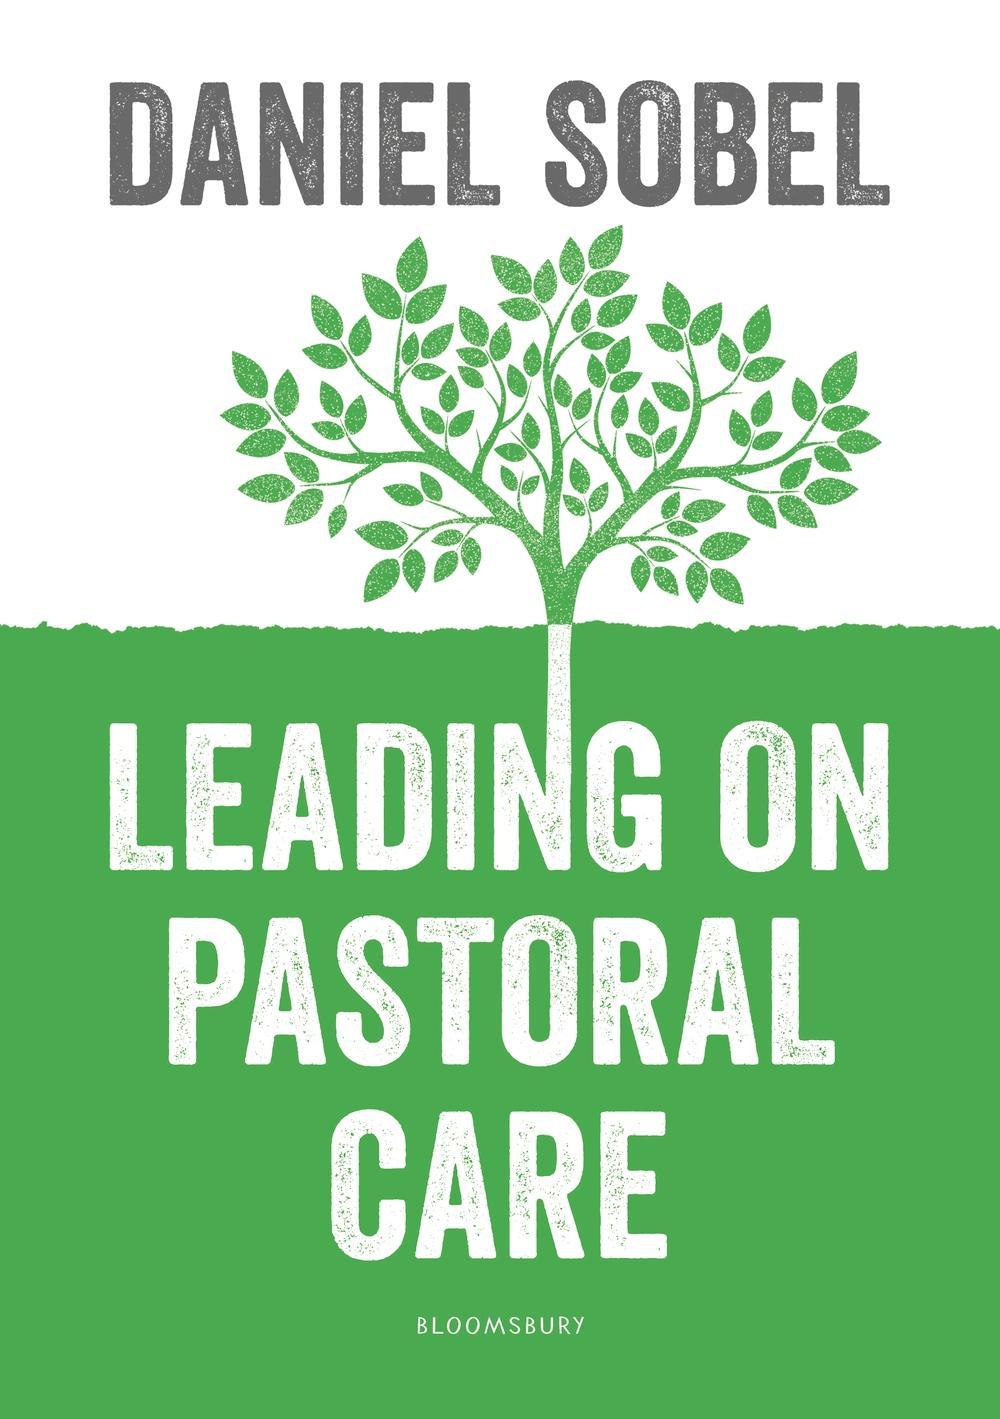 Leading on Pastoral Care